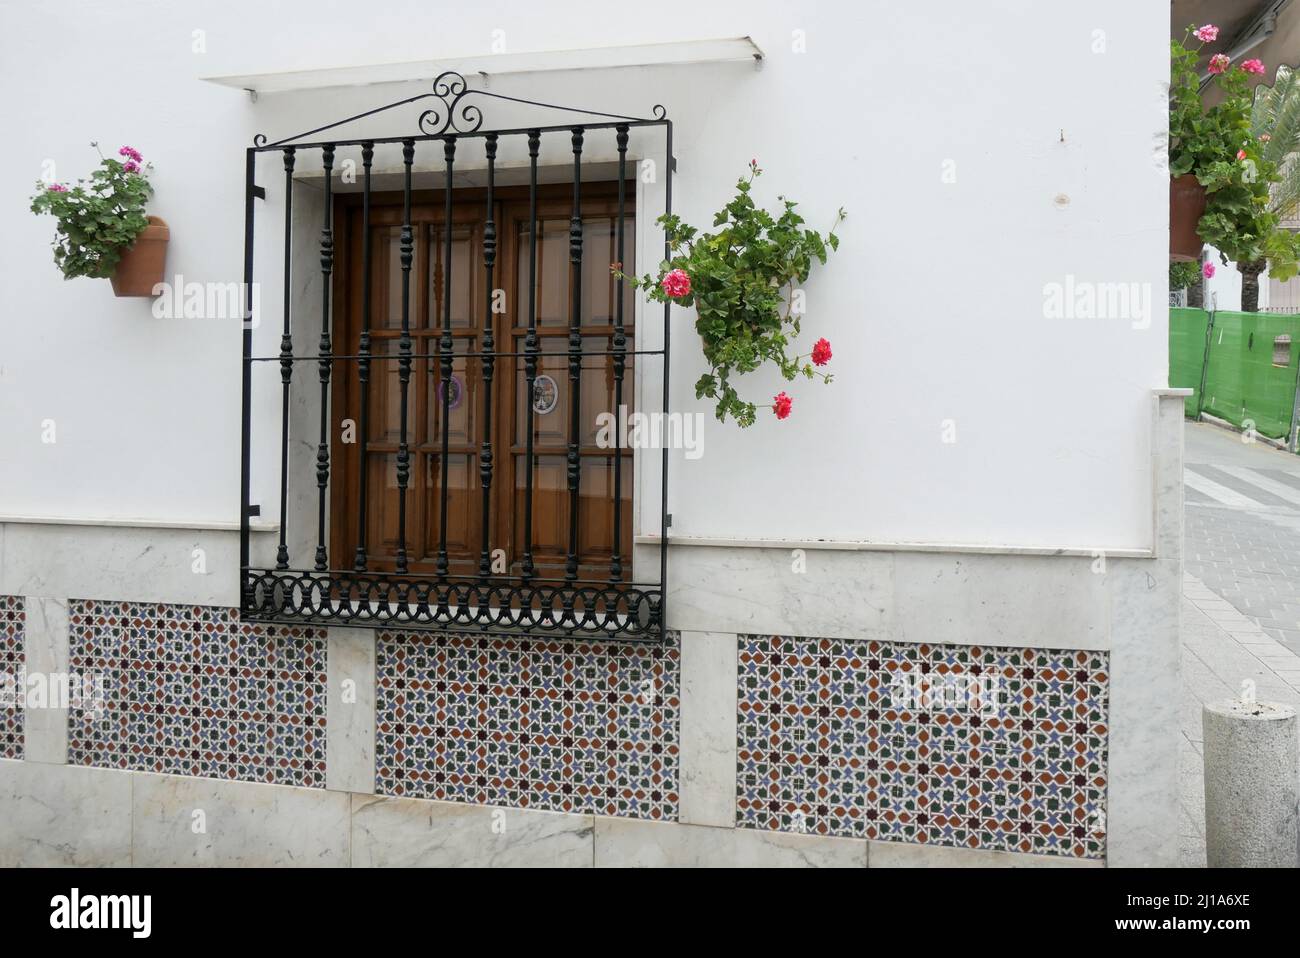 Window with iron grill flanked by two wall mounted flower pots in Andalusian village Stock Photo